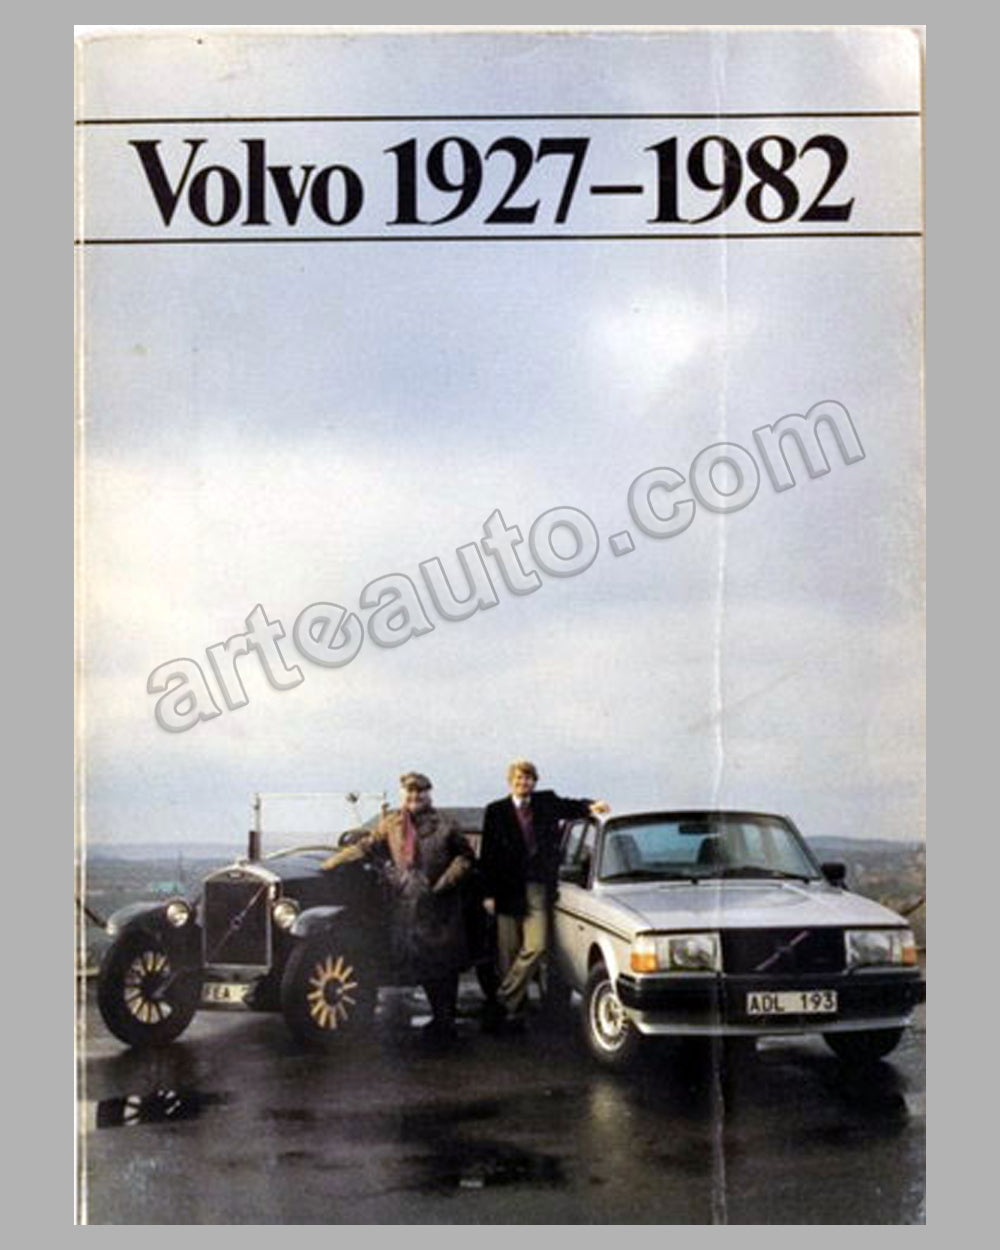 Volvo 1927-1982 book published by the company, 1982